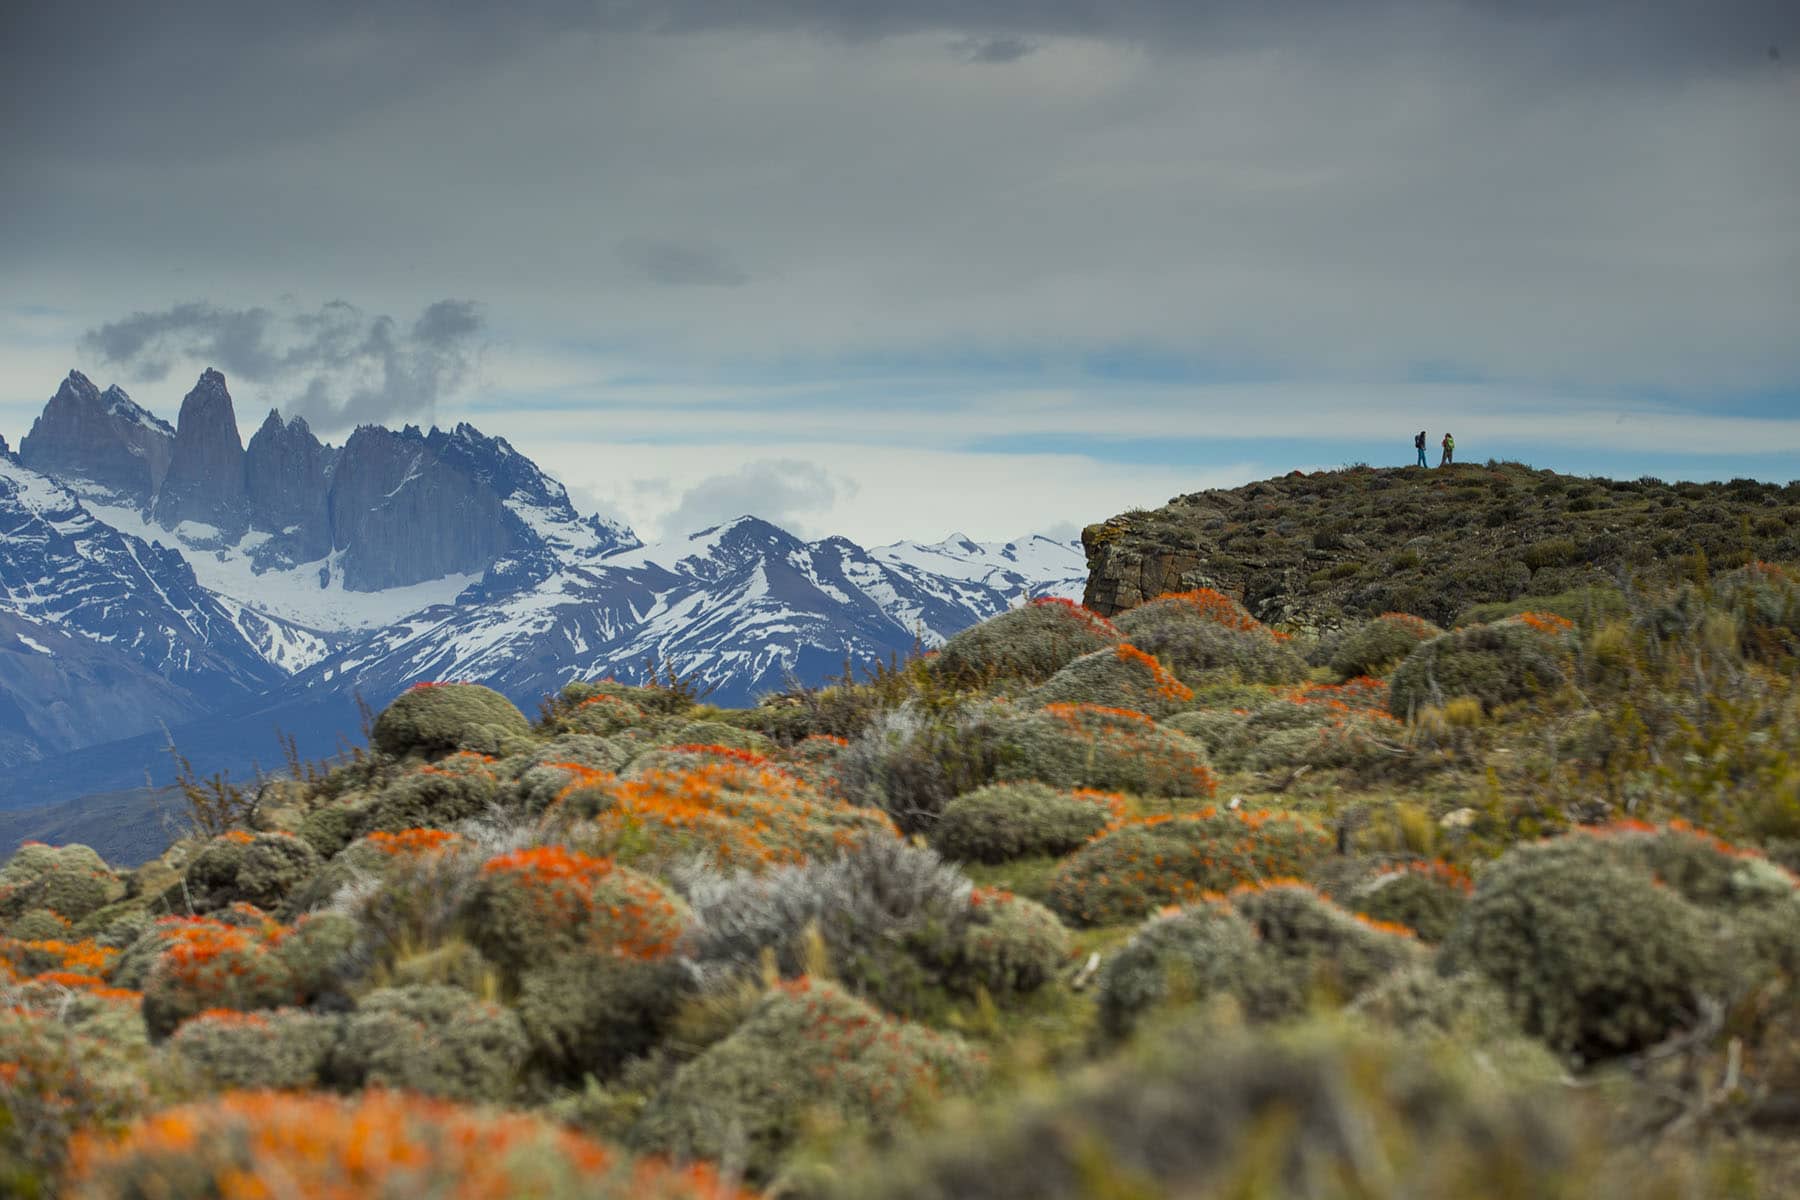 Did you know that Spring is the best time to visit Patagonia?